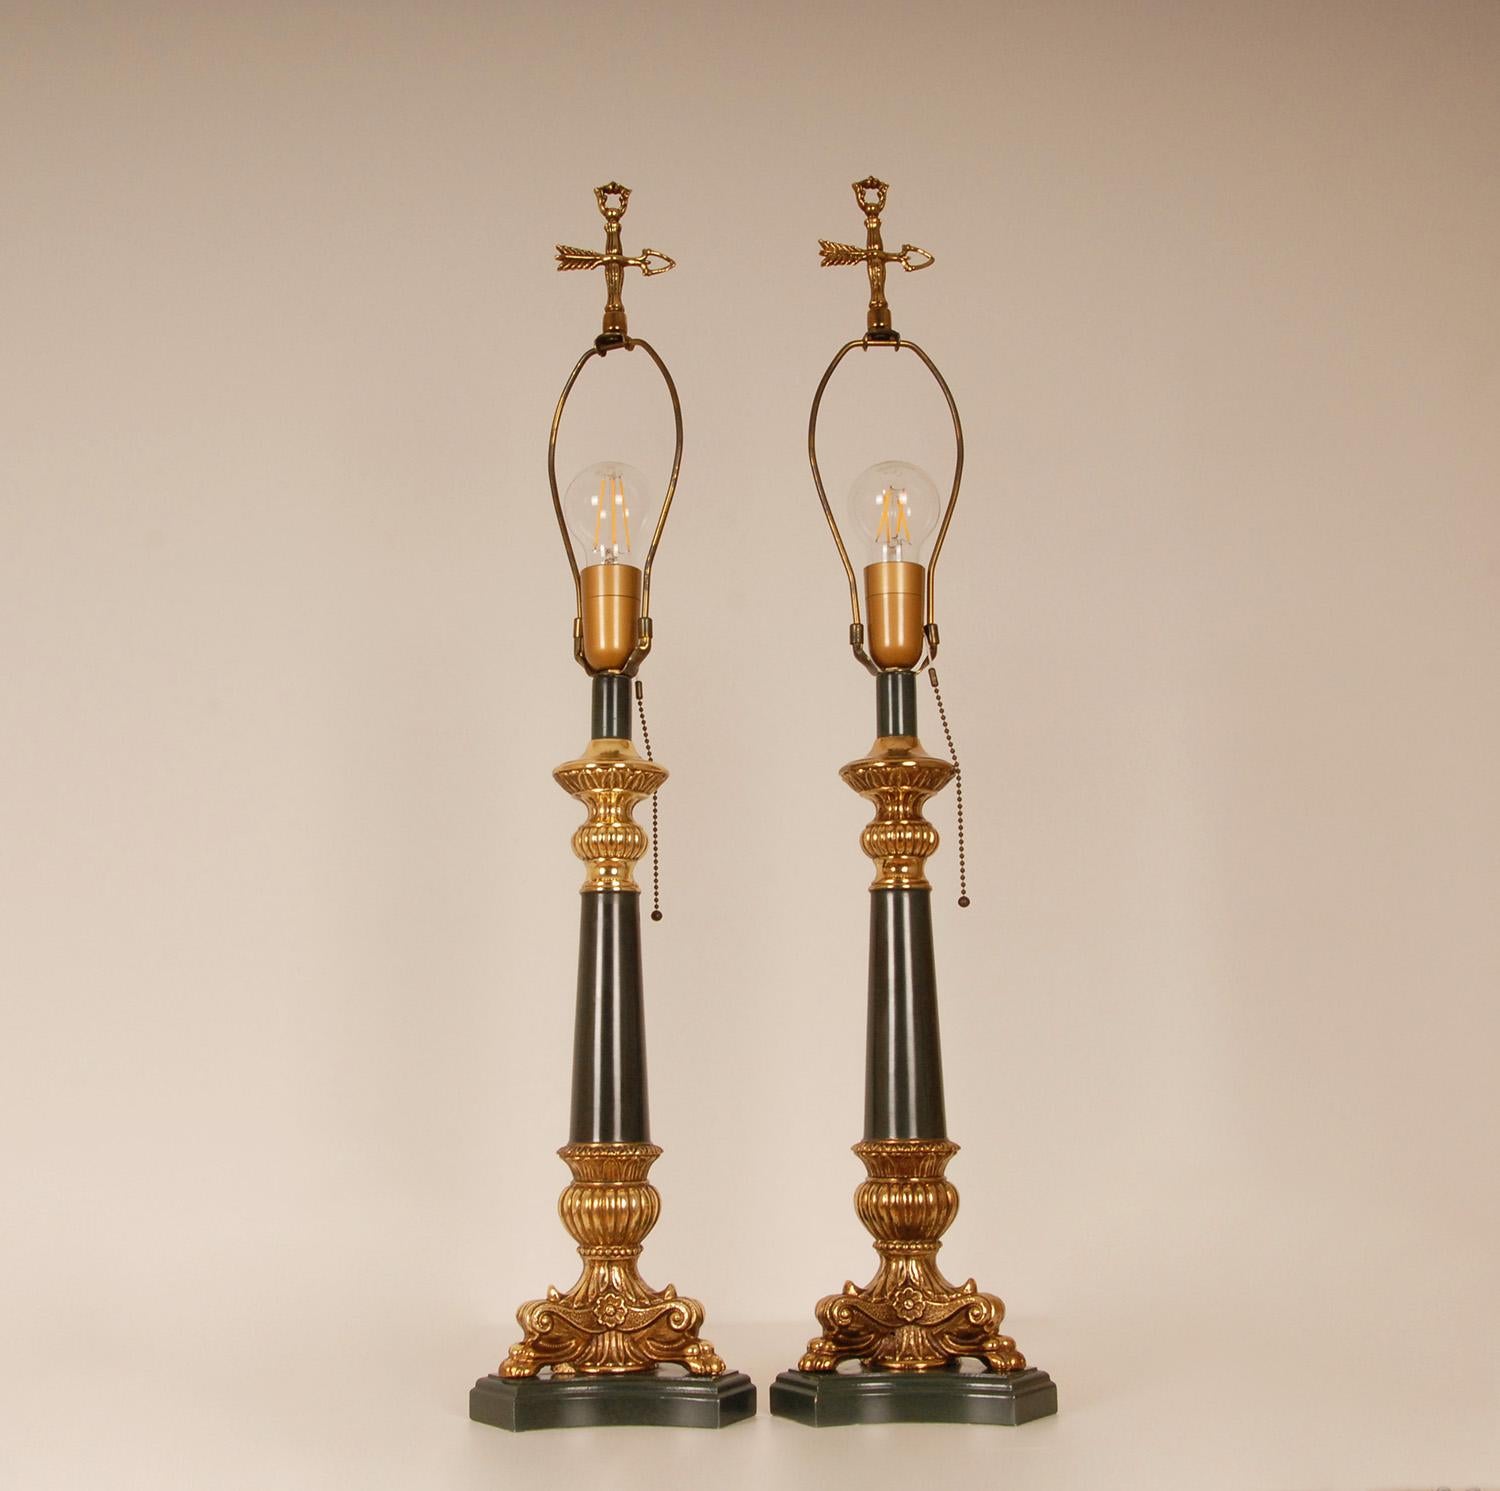 French Bouillotte Lamps Napoleonic Empire Green Gold Gilded Vintage Table Lamps For Sale 2